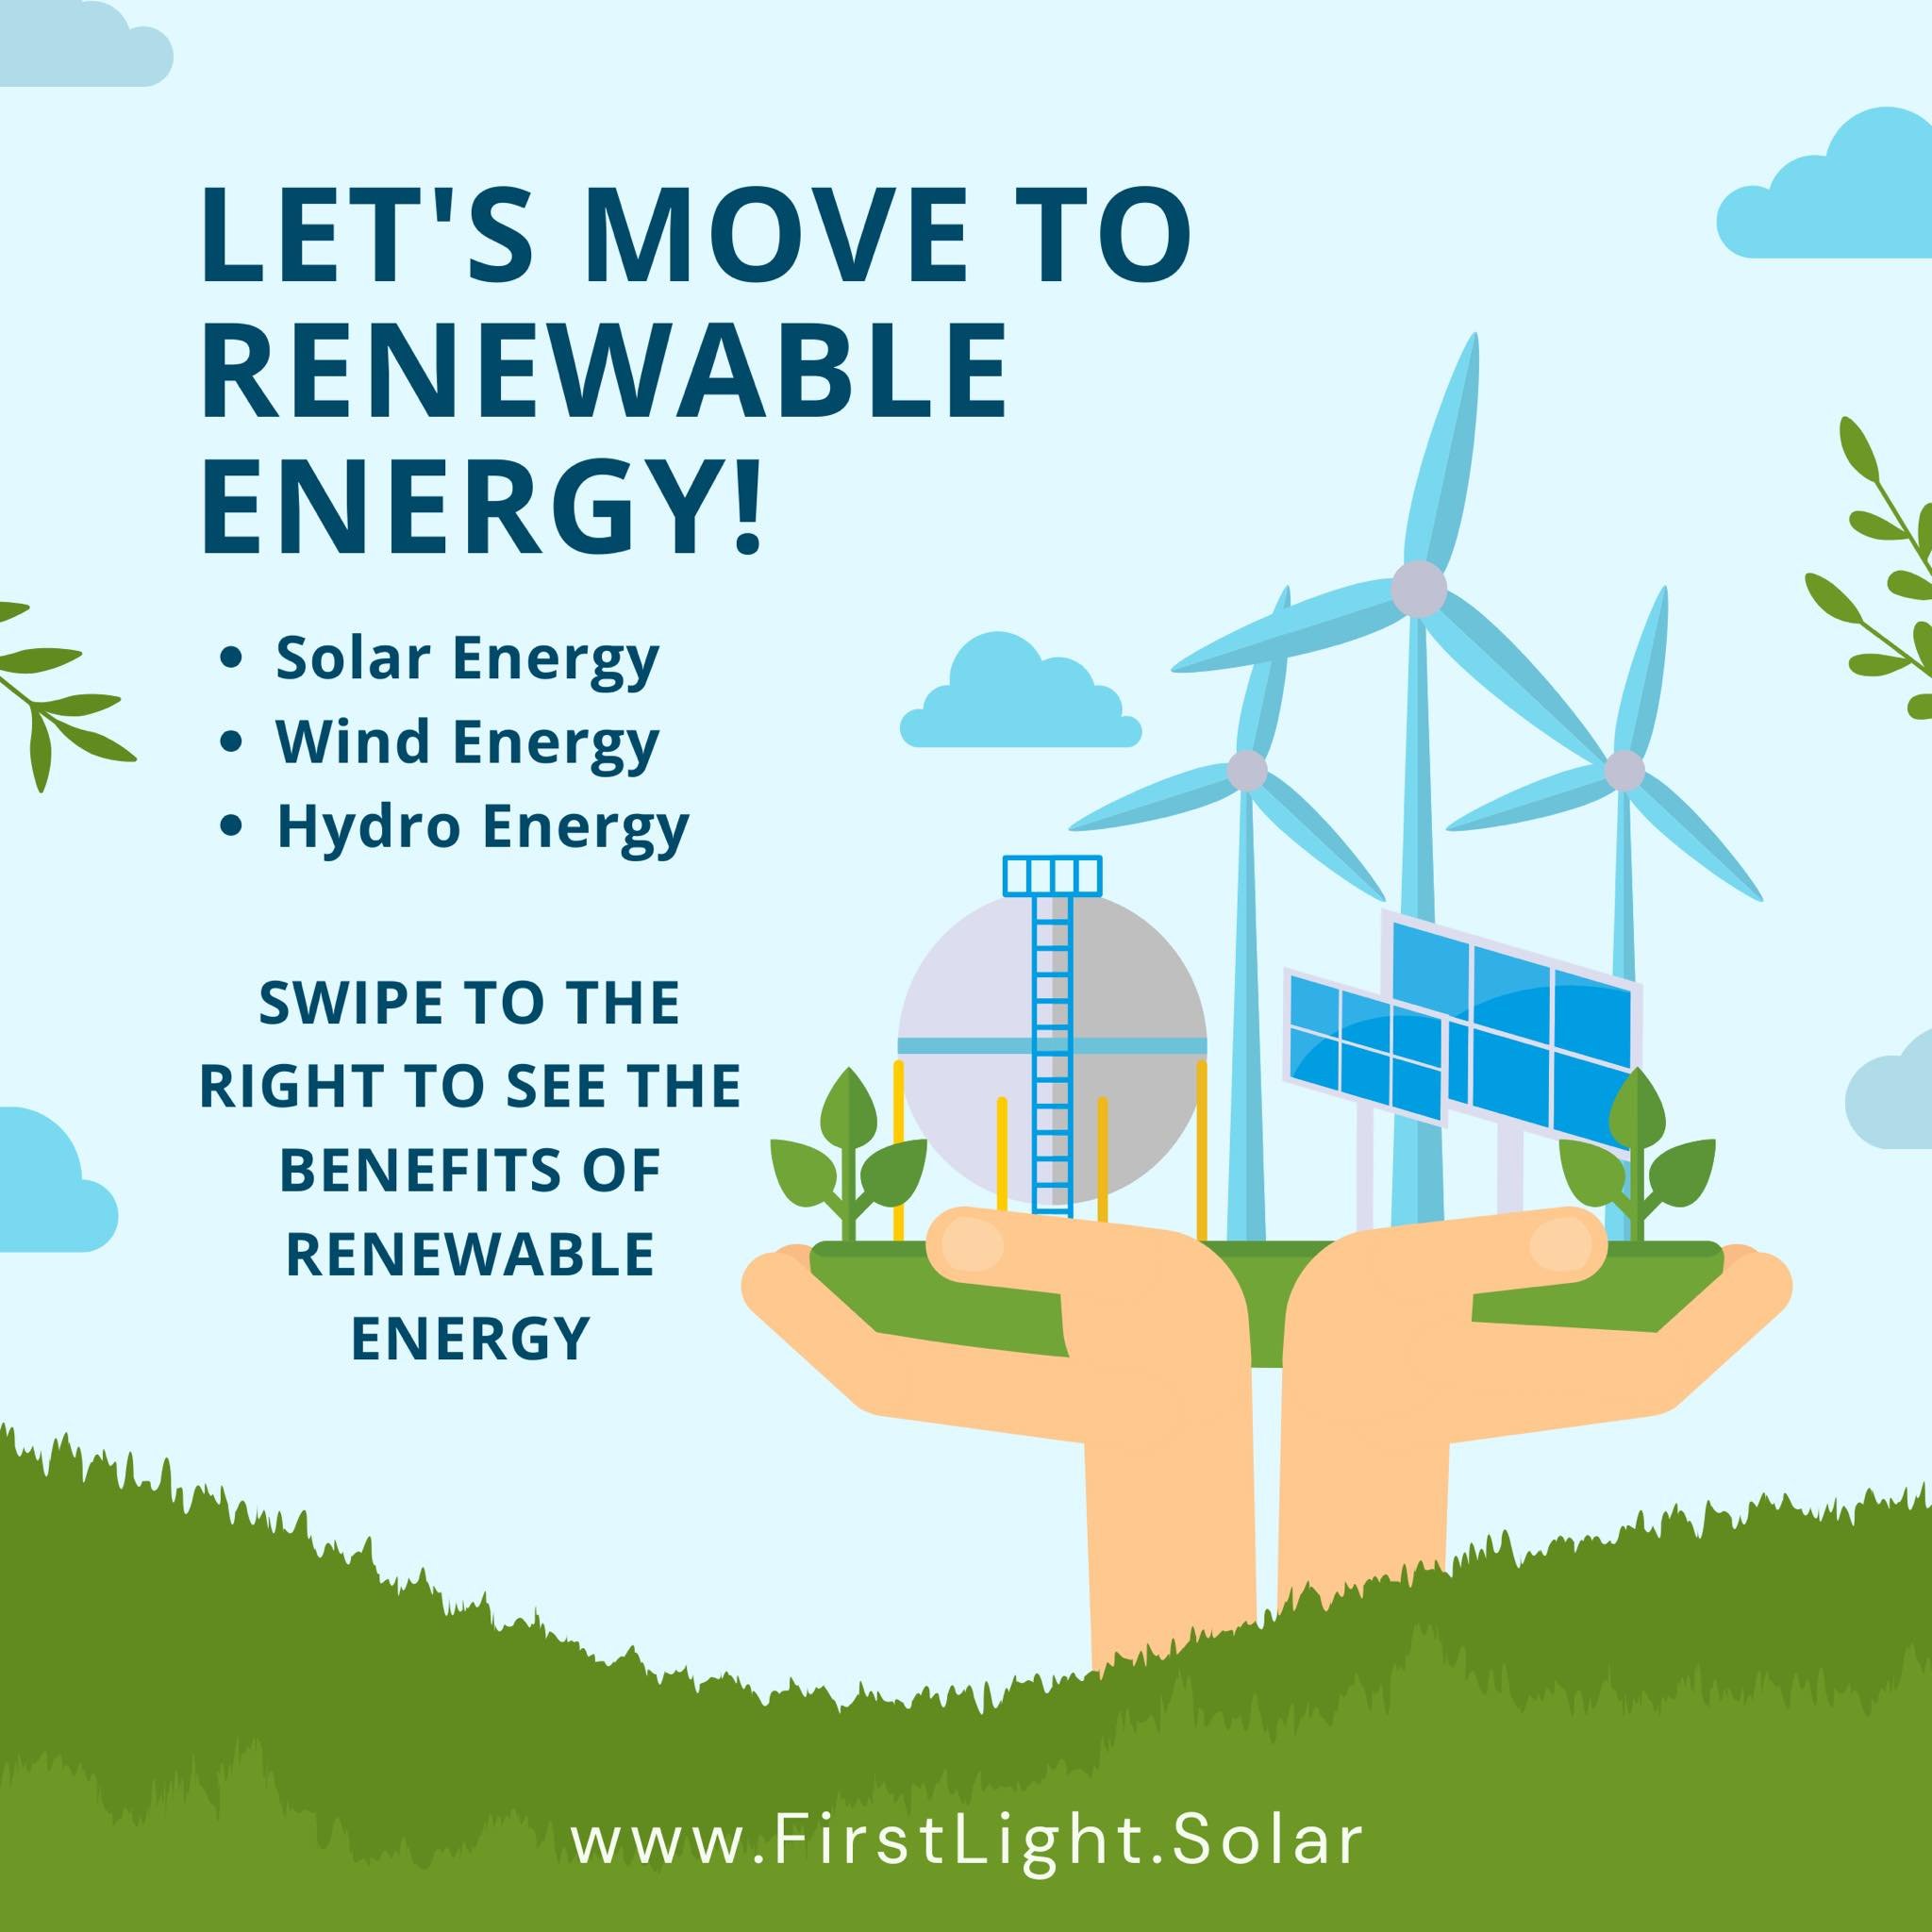 Renewable energy is the way of the future. By choosing solar power for your home or business you can reduce your energy cost and help our environment.